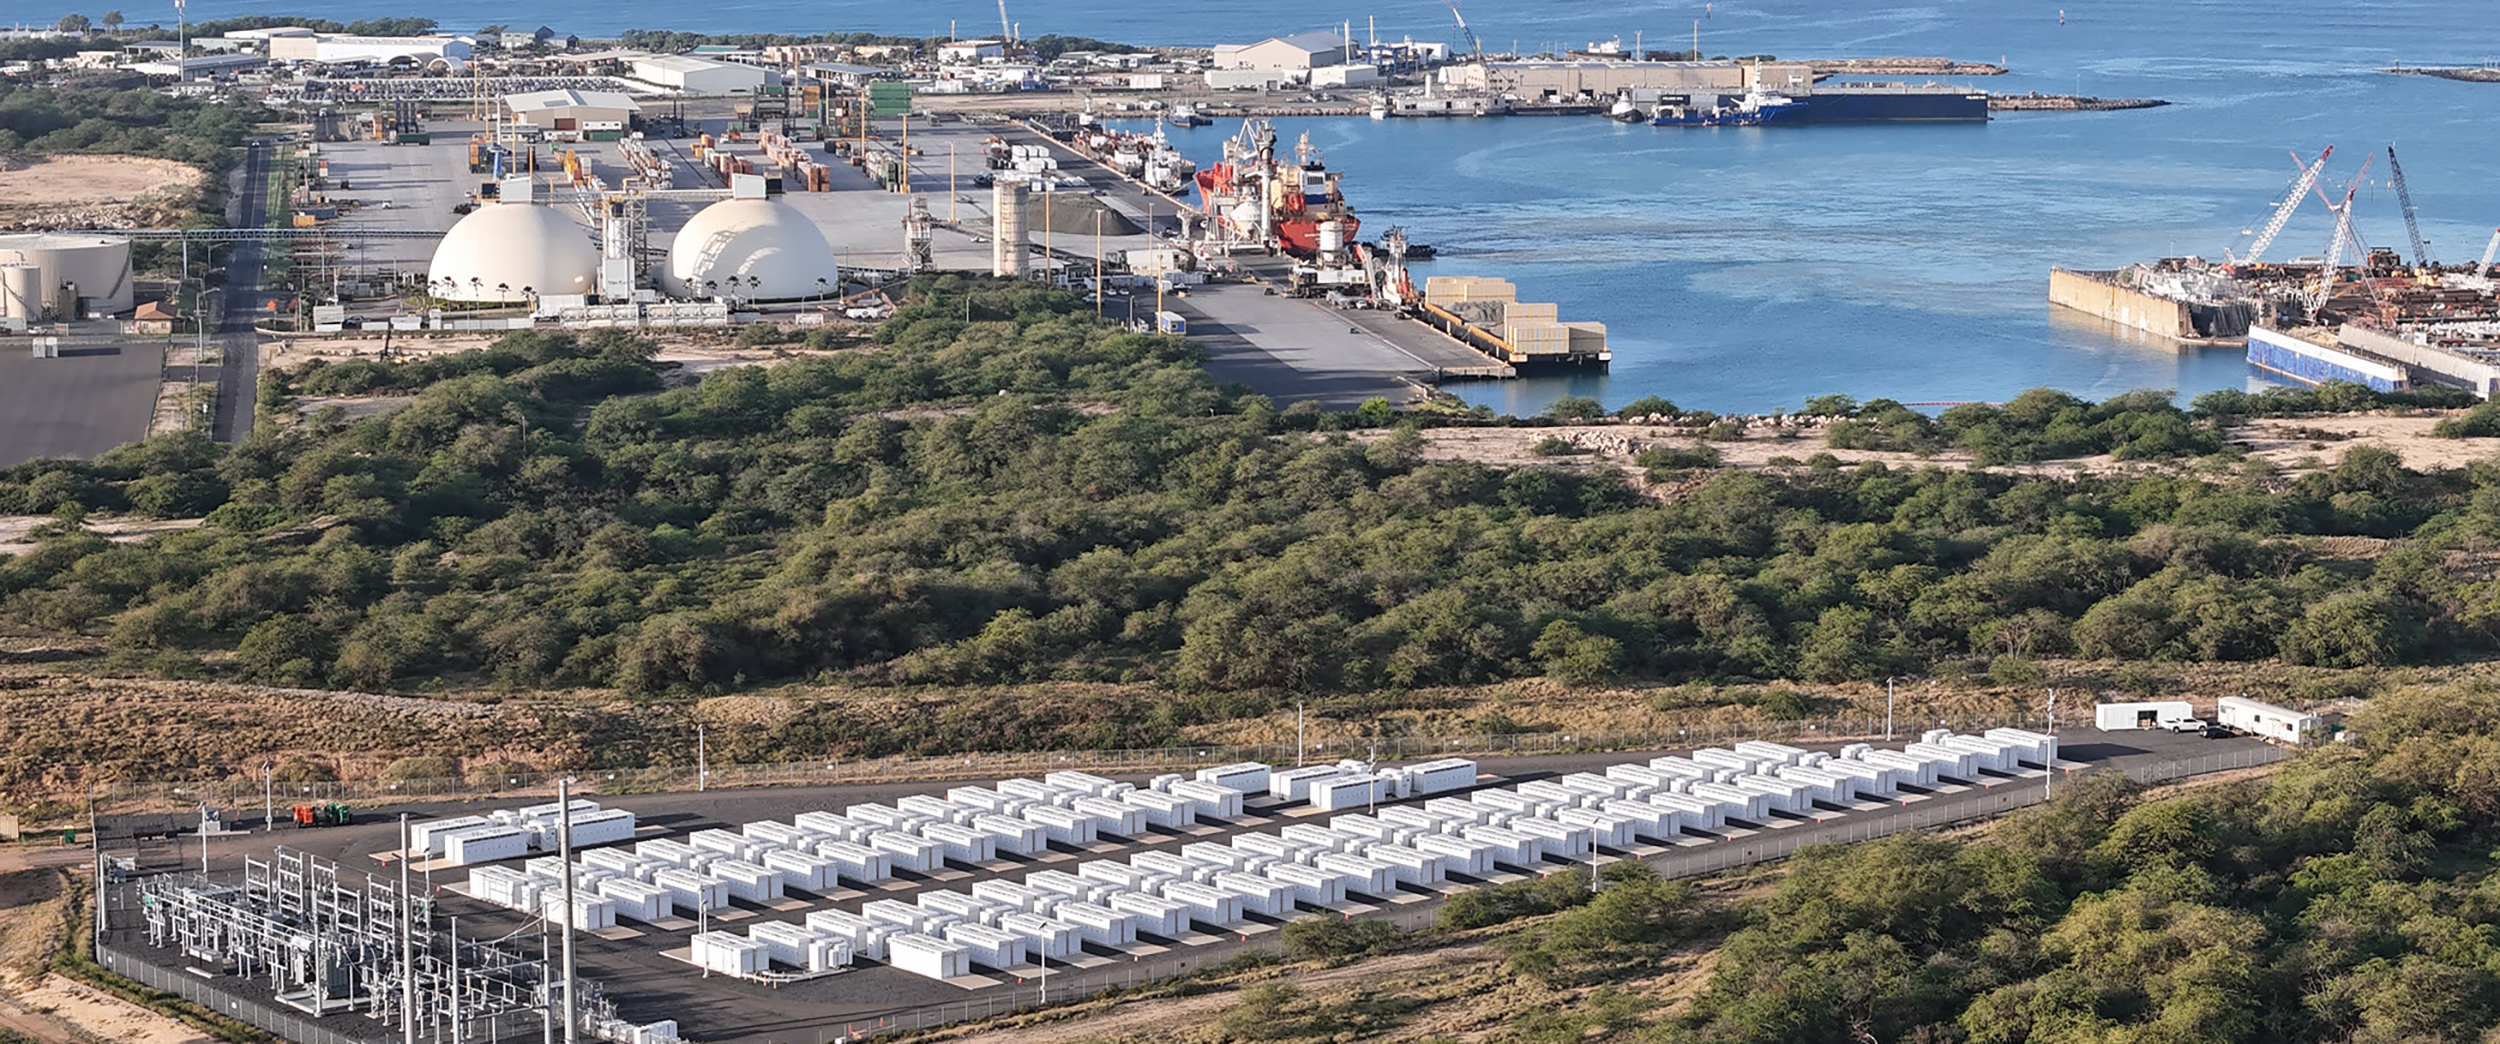 Large battery energy storage system now operating in Hawaii